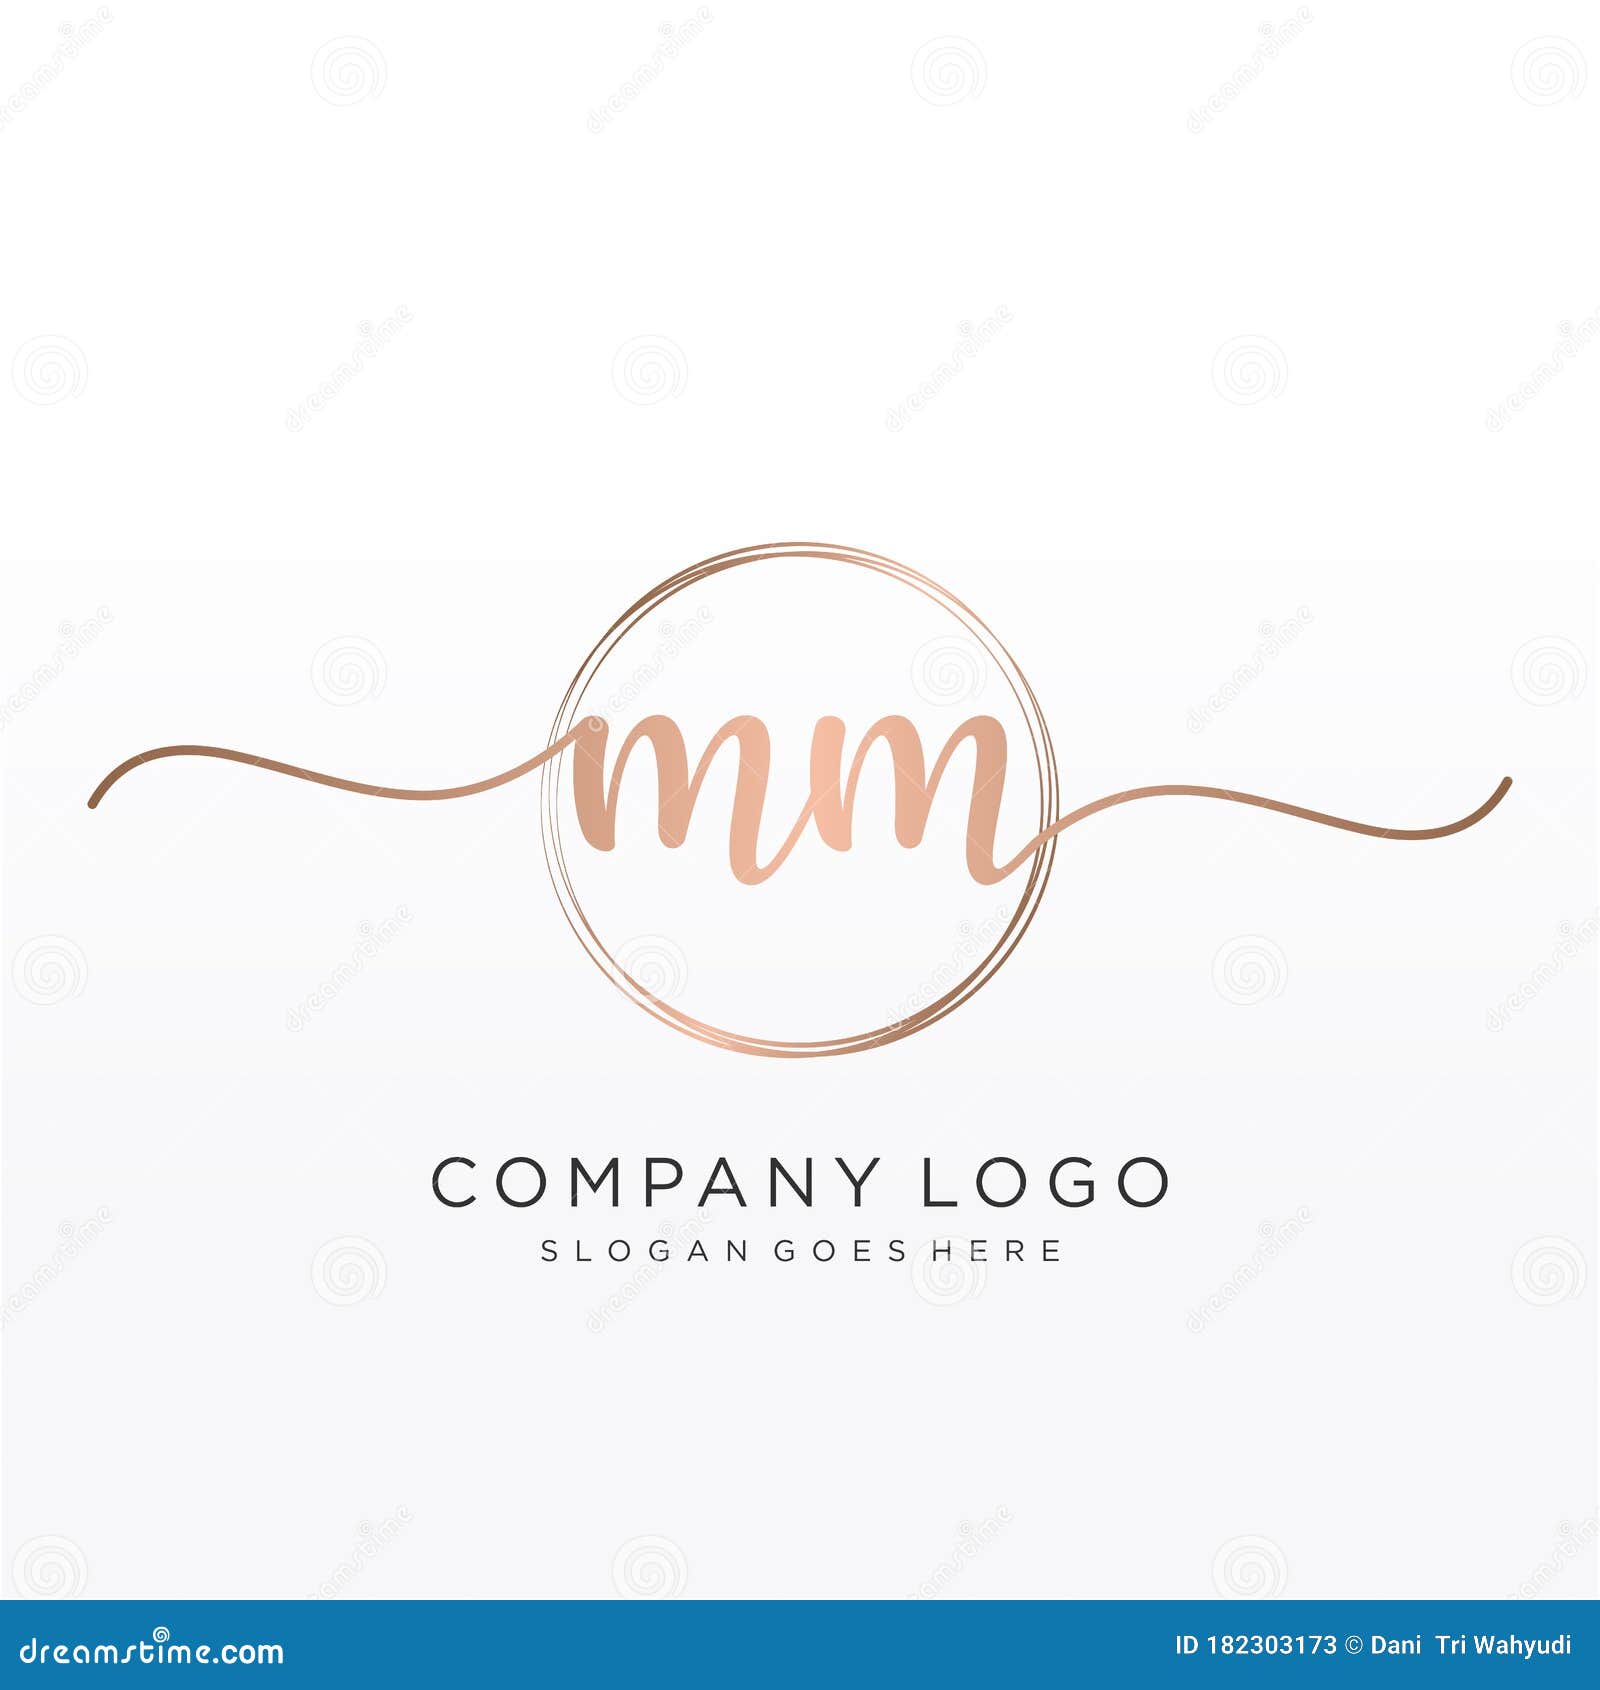 MM Initial Handwriting Logo with Circle Stock Vector - Illustration of ...